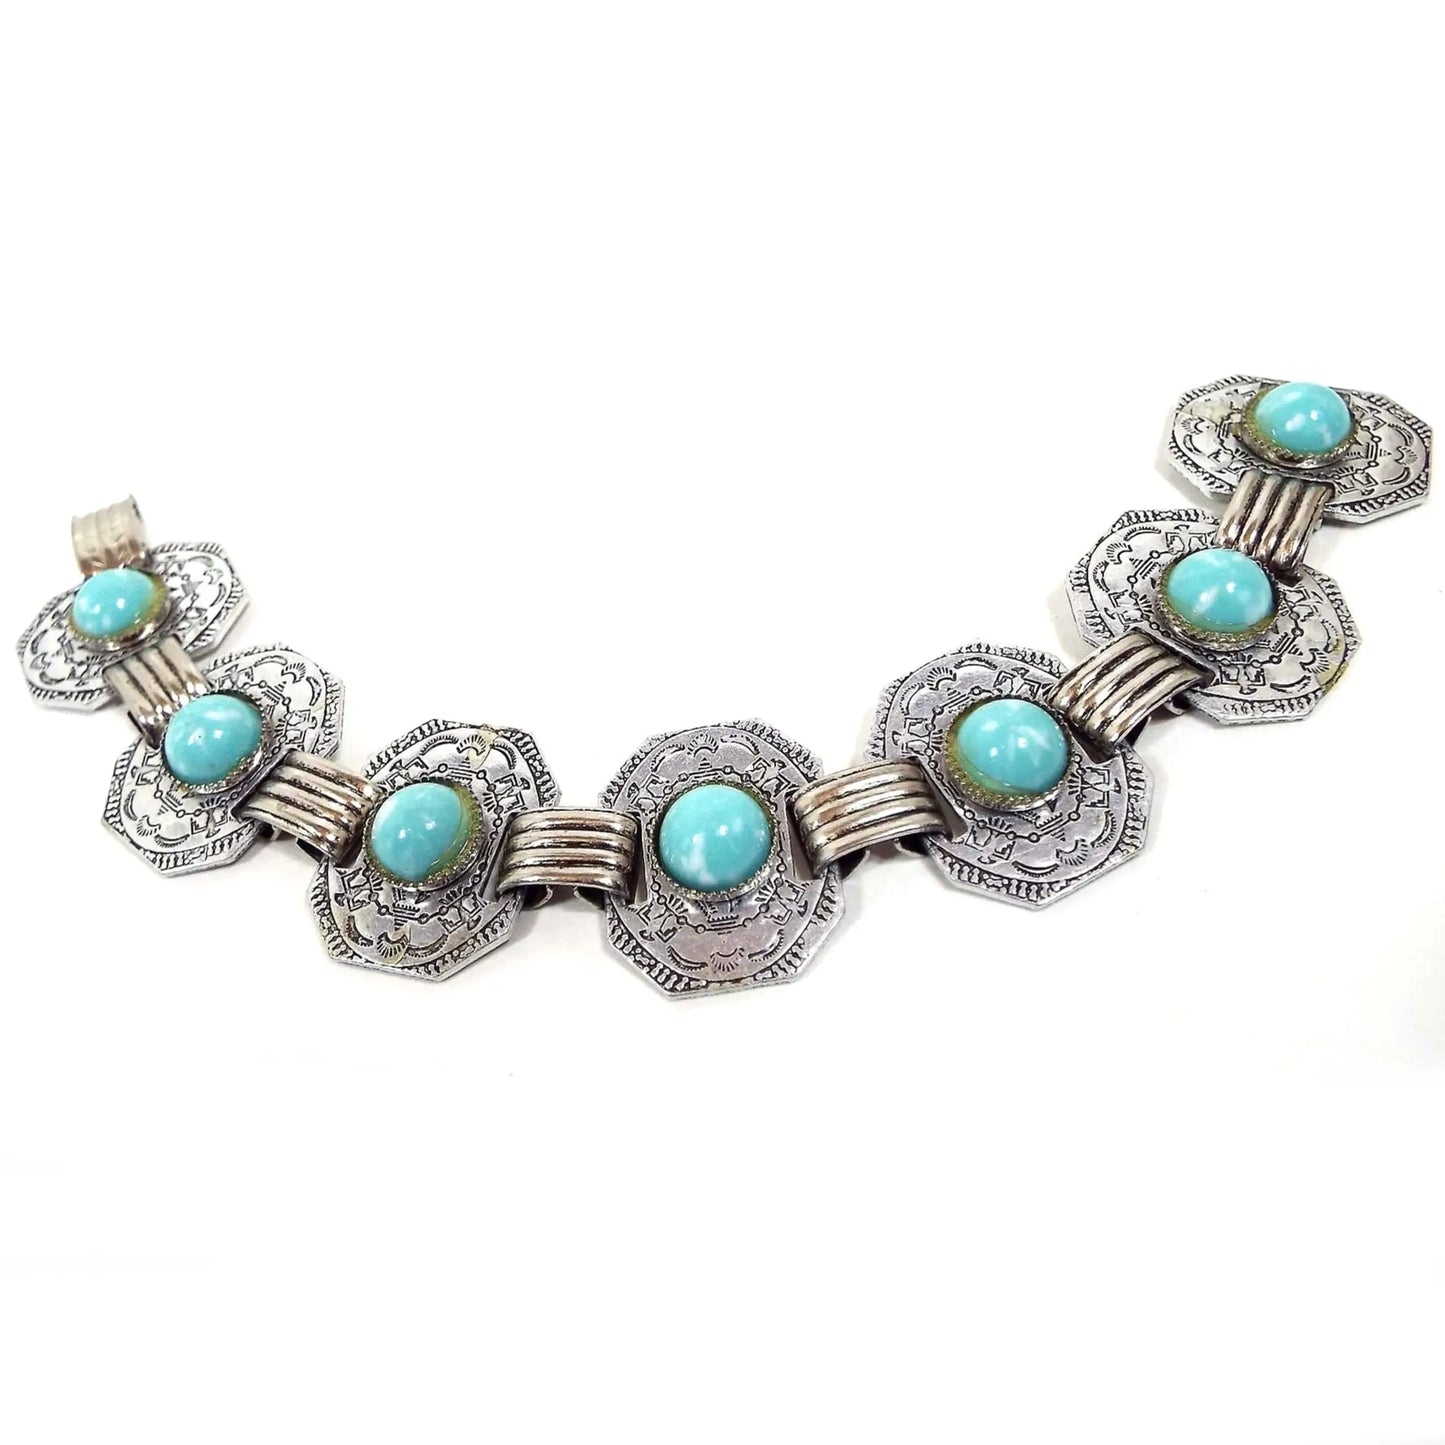 Top view of the Mid Century vintage link bracelet. Each link has a blue and white marbled plastic cab. The metal is silver tone in color and the links have a stamped Southwestern tribal style design.